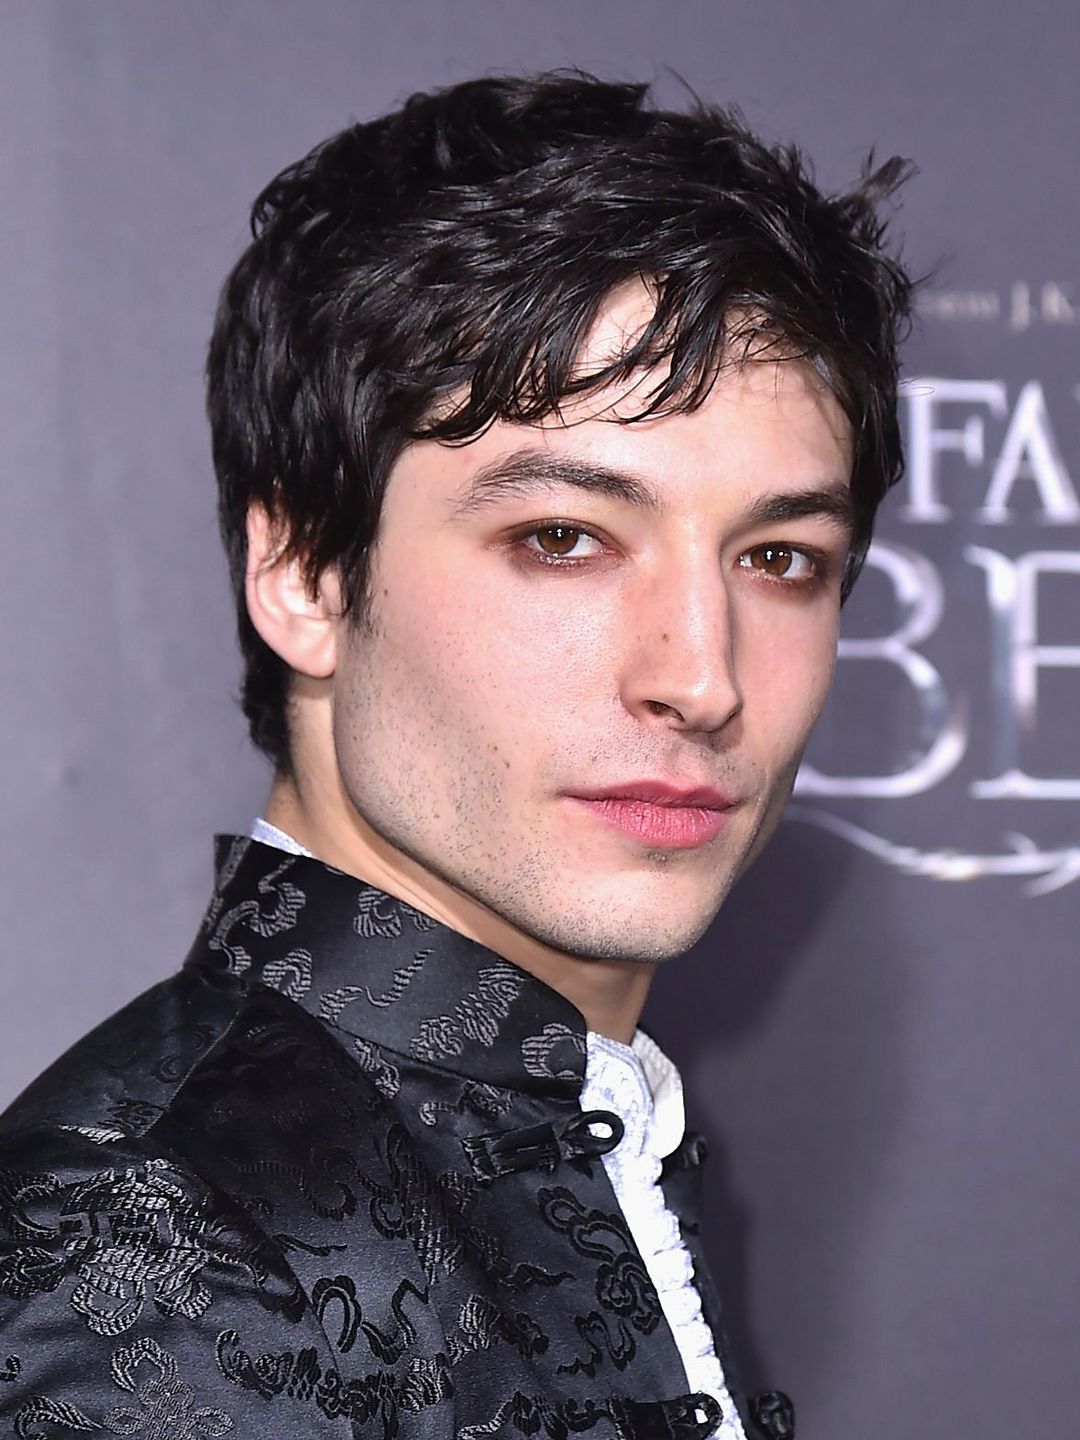 Ezra Miller in his youth